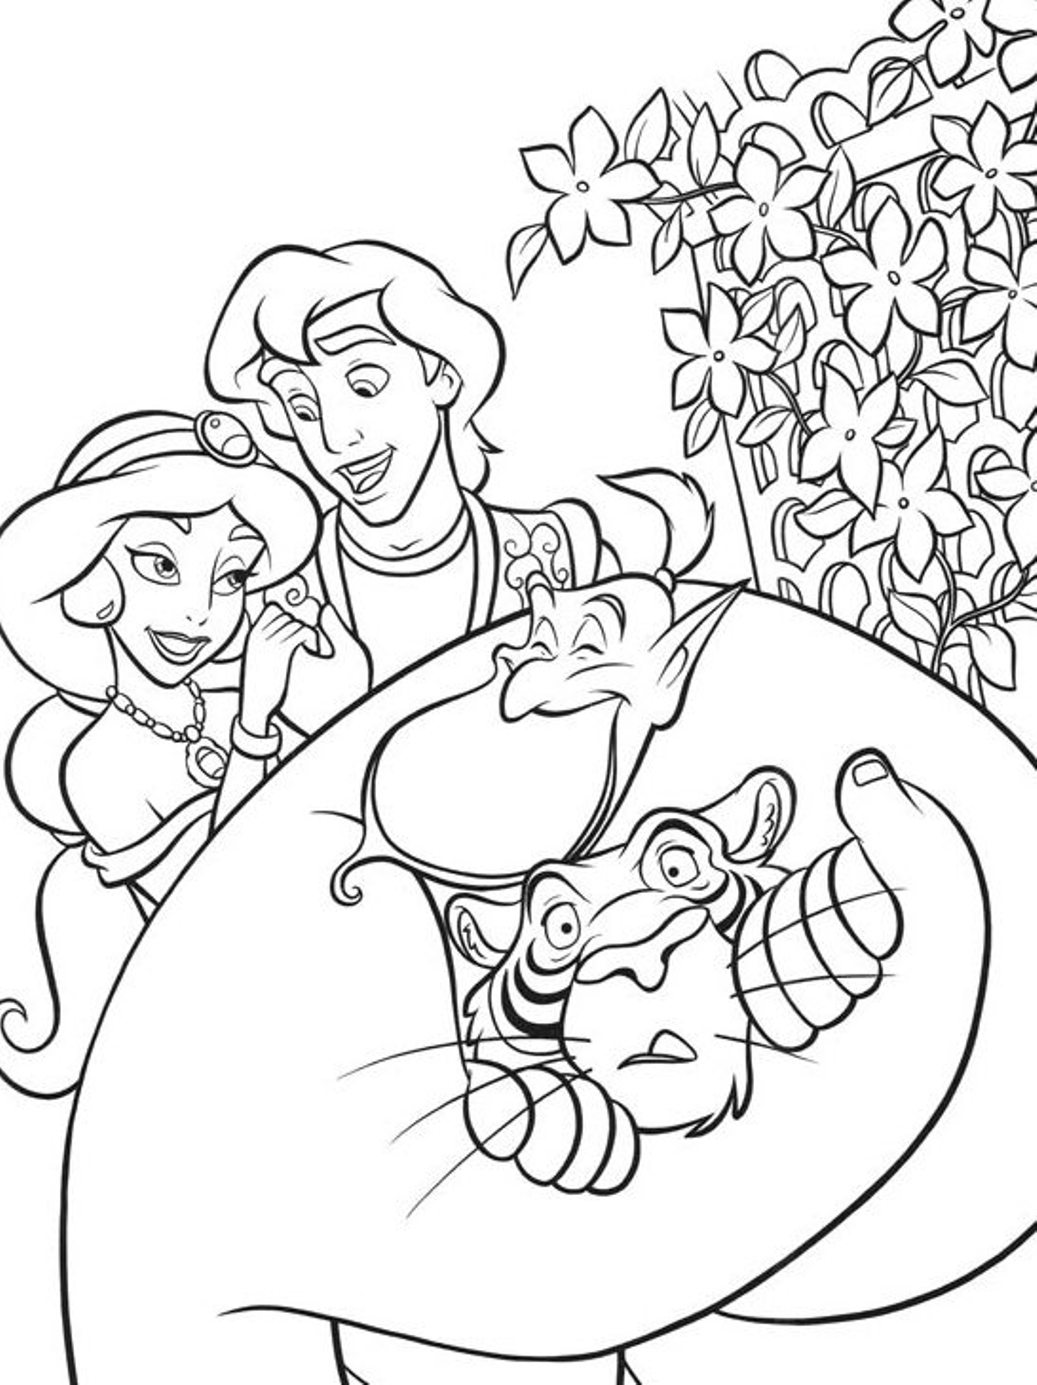 Aladdin coloring pages to download and print for free